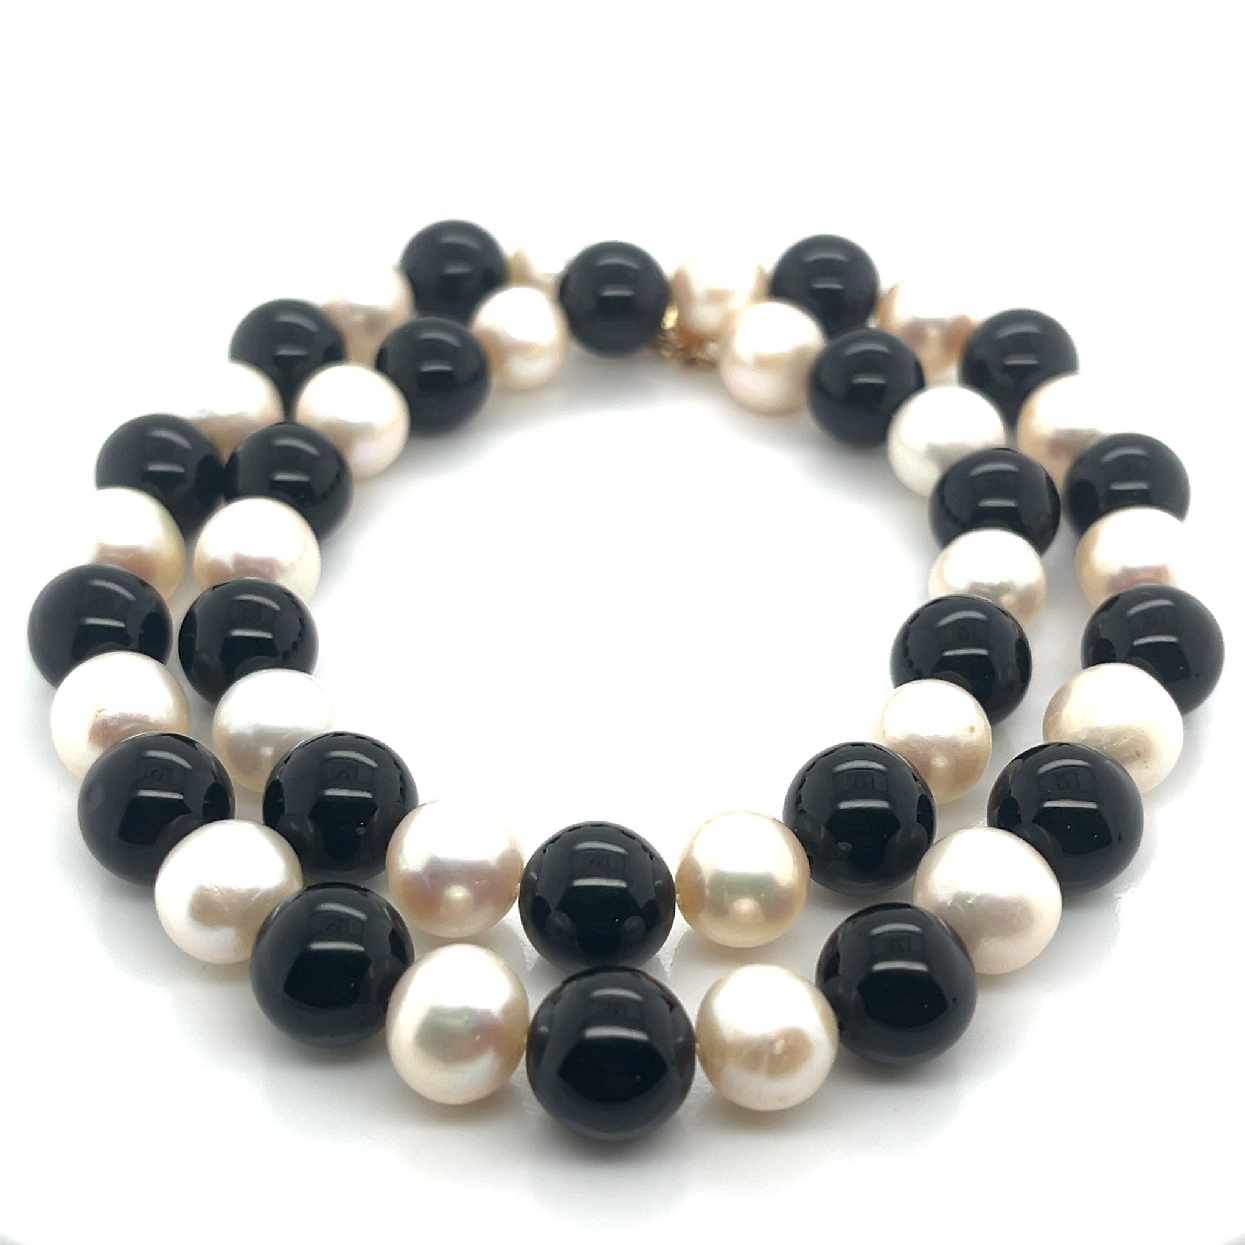 18 Inch Pearl and Onyx Necklace with 14K Yellow Gold Clasp

Pearls: 8-9mm
Onyx: 9-10mm